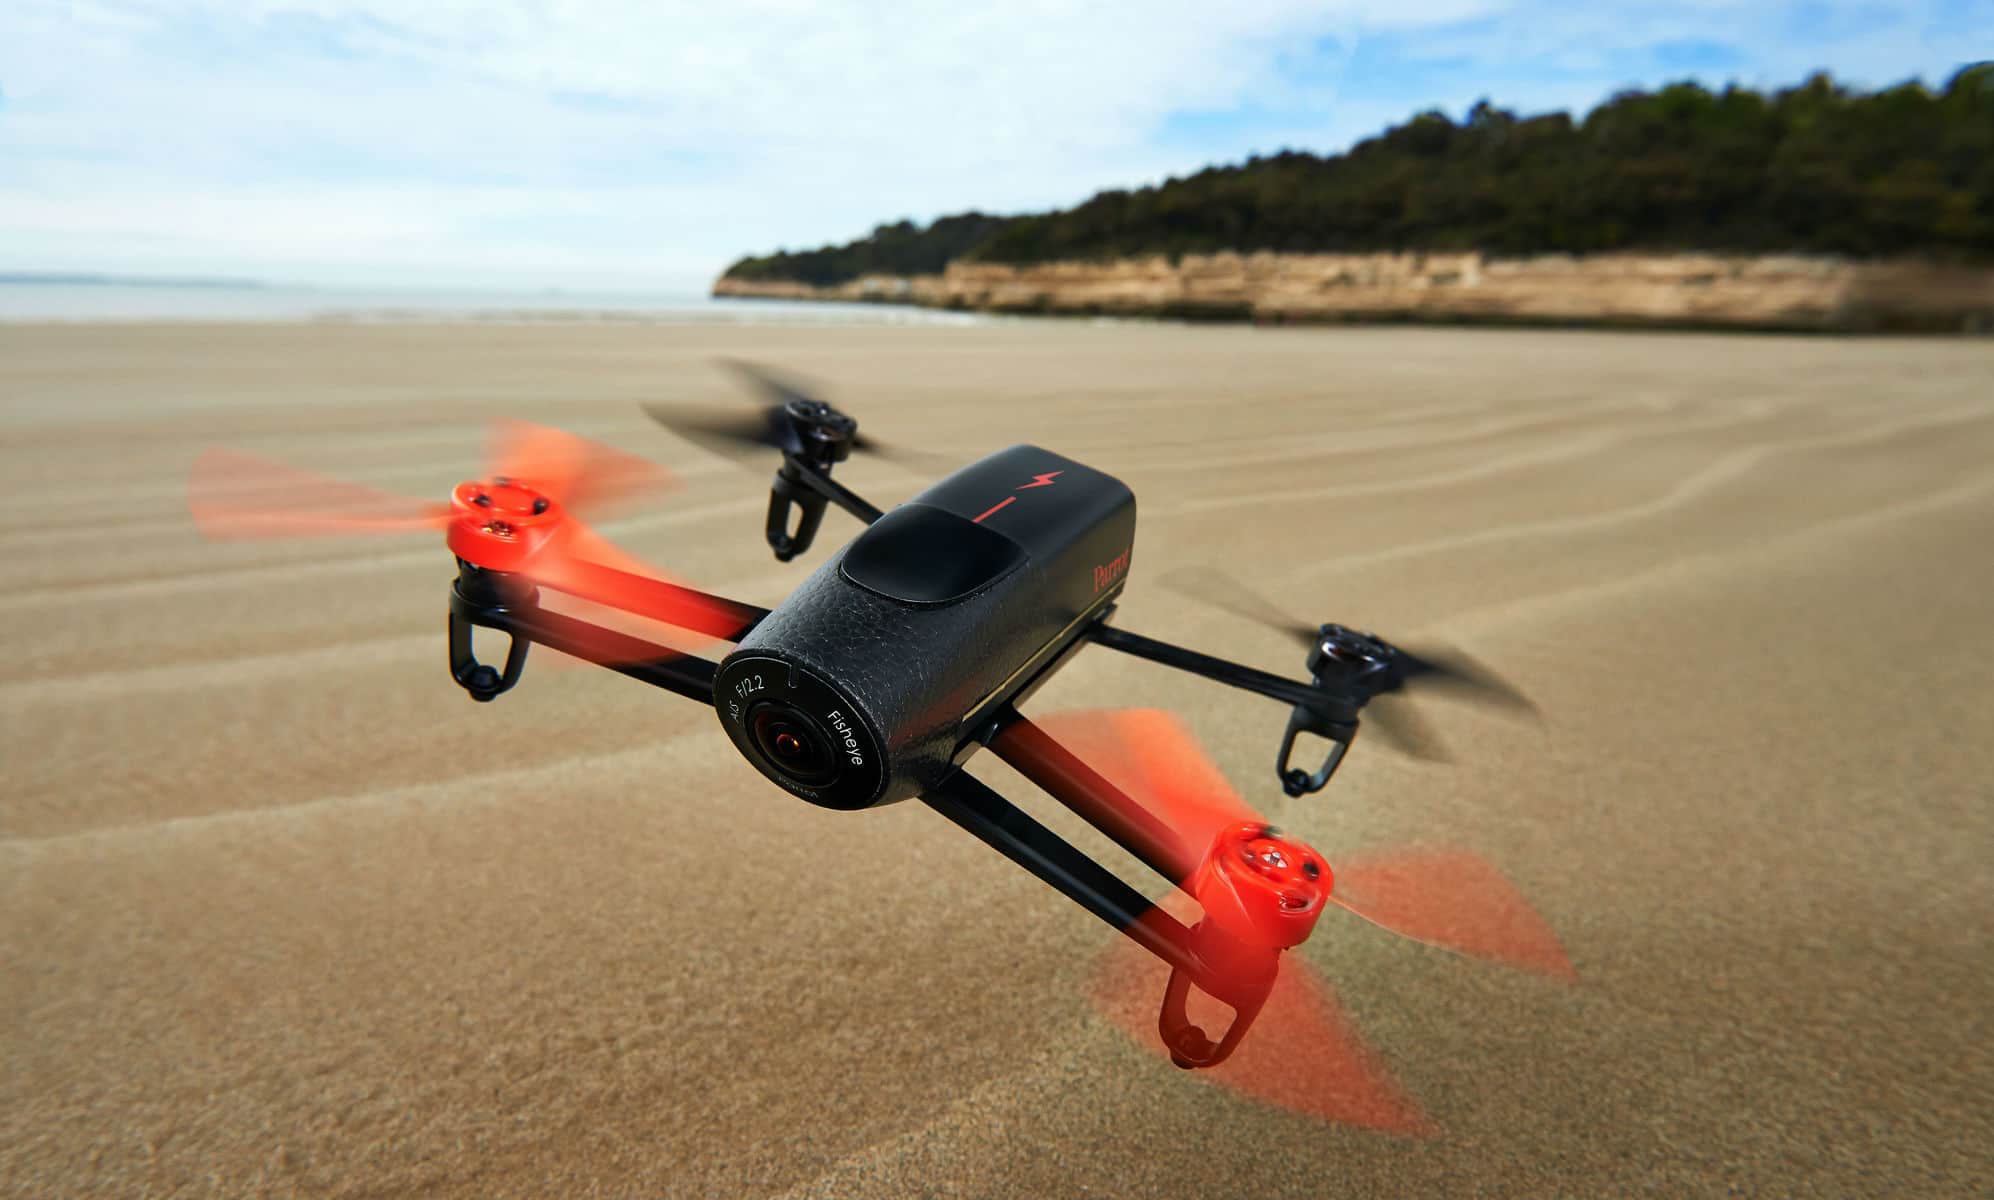 Parrot to Release the Bebop Drone with HD Camera and VR Compatibility